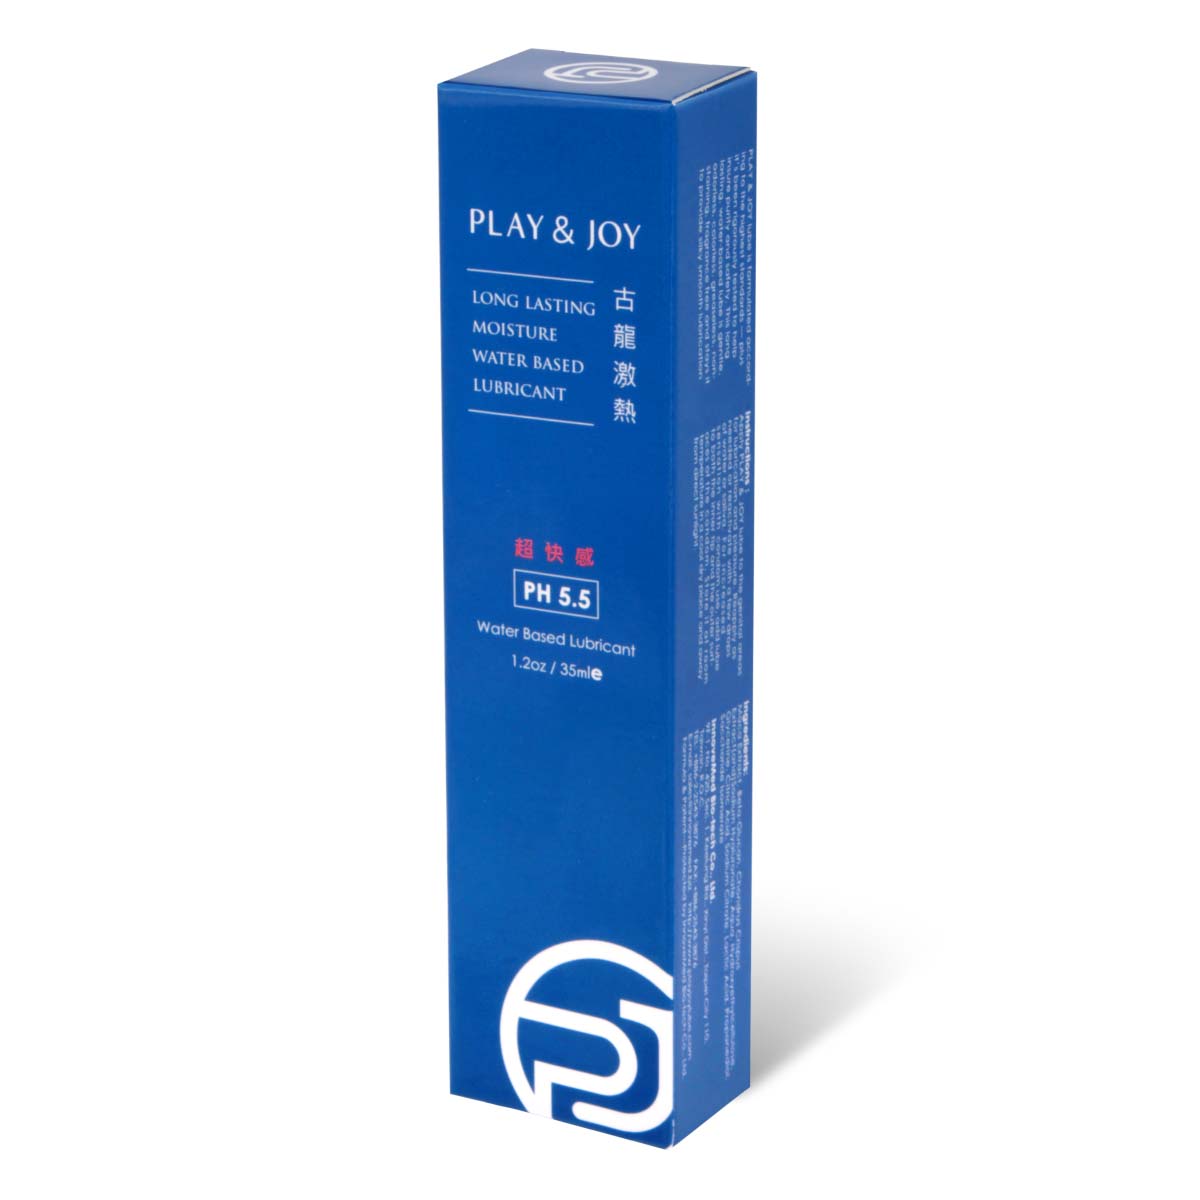 PLAY & JOY Cologne Maca extra hot 35ml Water-based Lubricant-p_1